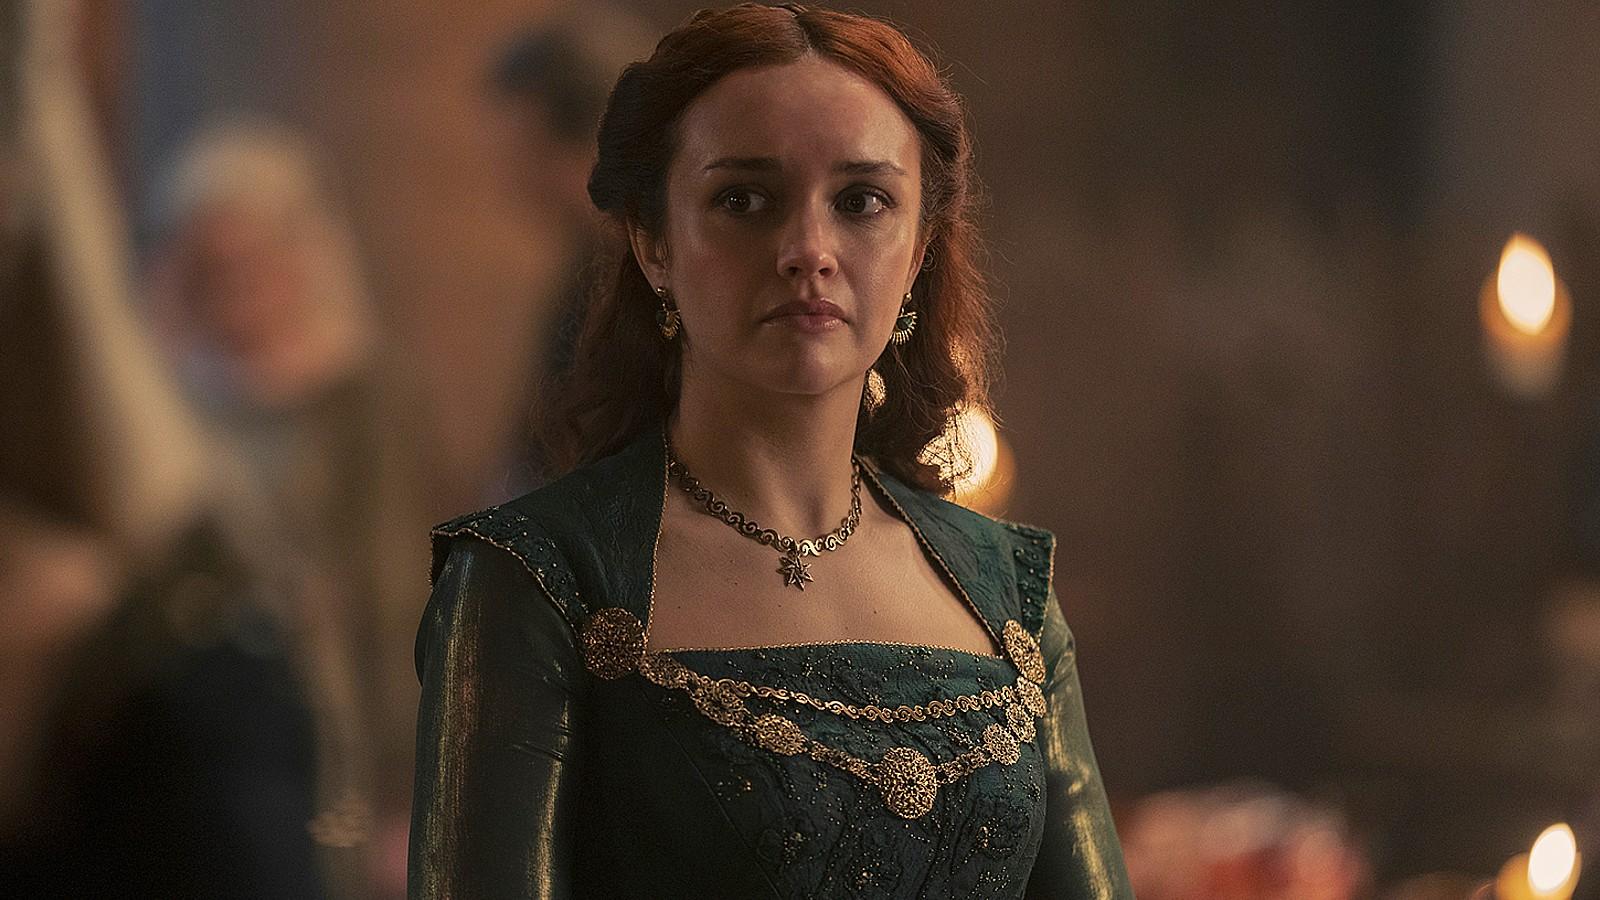 Olivia Cooke as Alicent in House of the Dragon